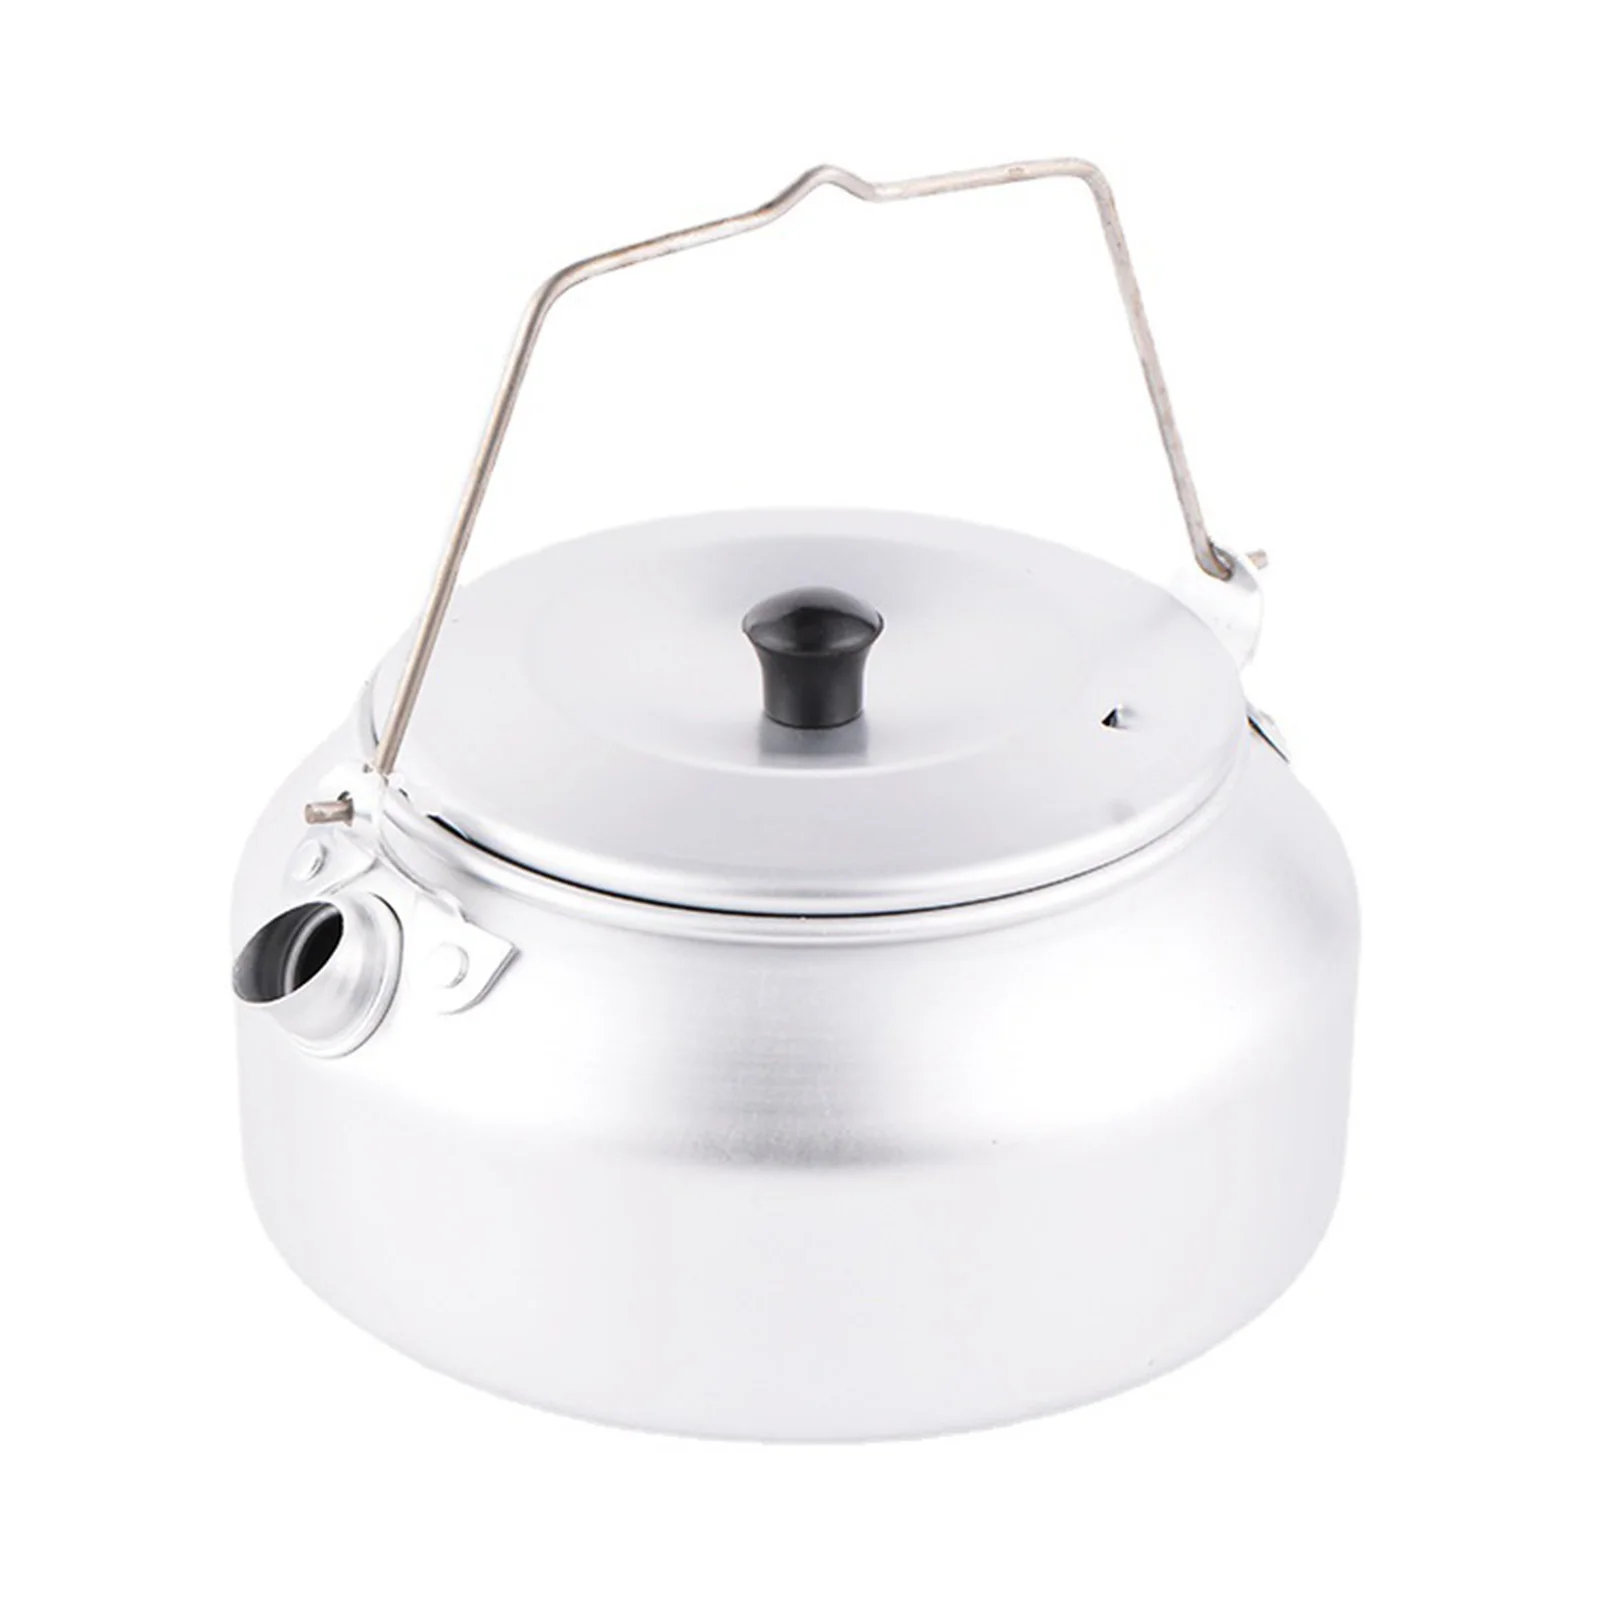 

Aluminum Kettle Pot Camp Tea Coffee Pot Durable Camp Tea Coffee Water Pot For Hiking Backpacking Outdoor Camping And Picnic